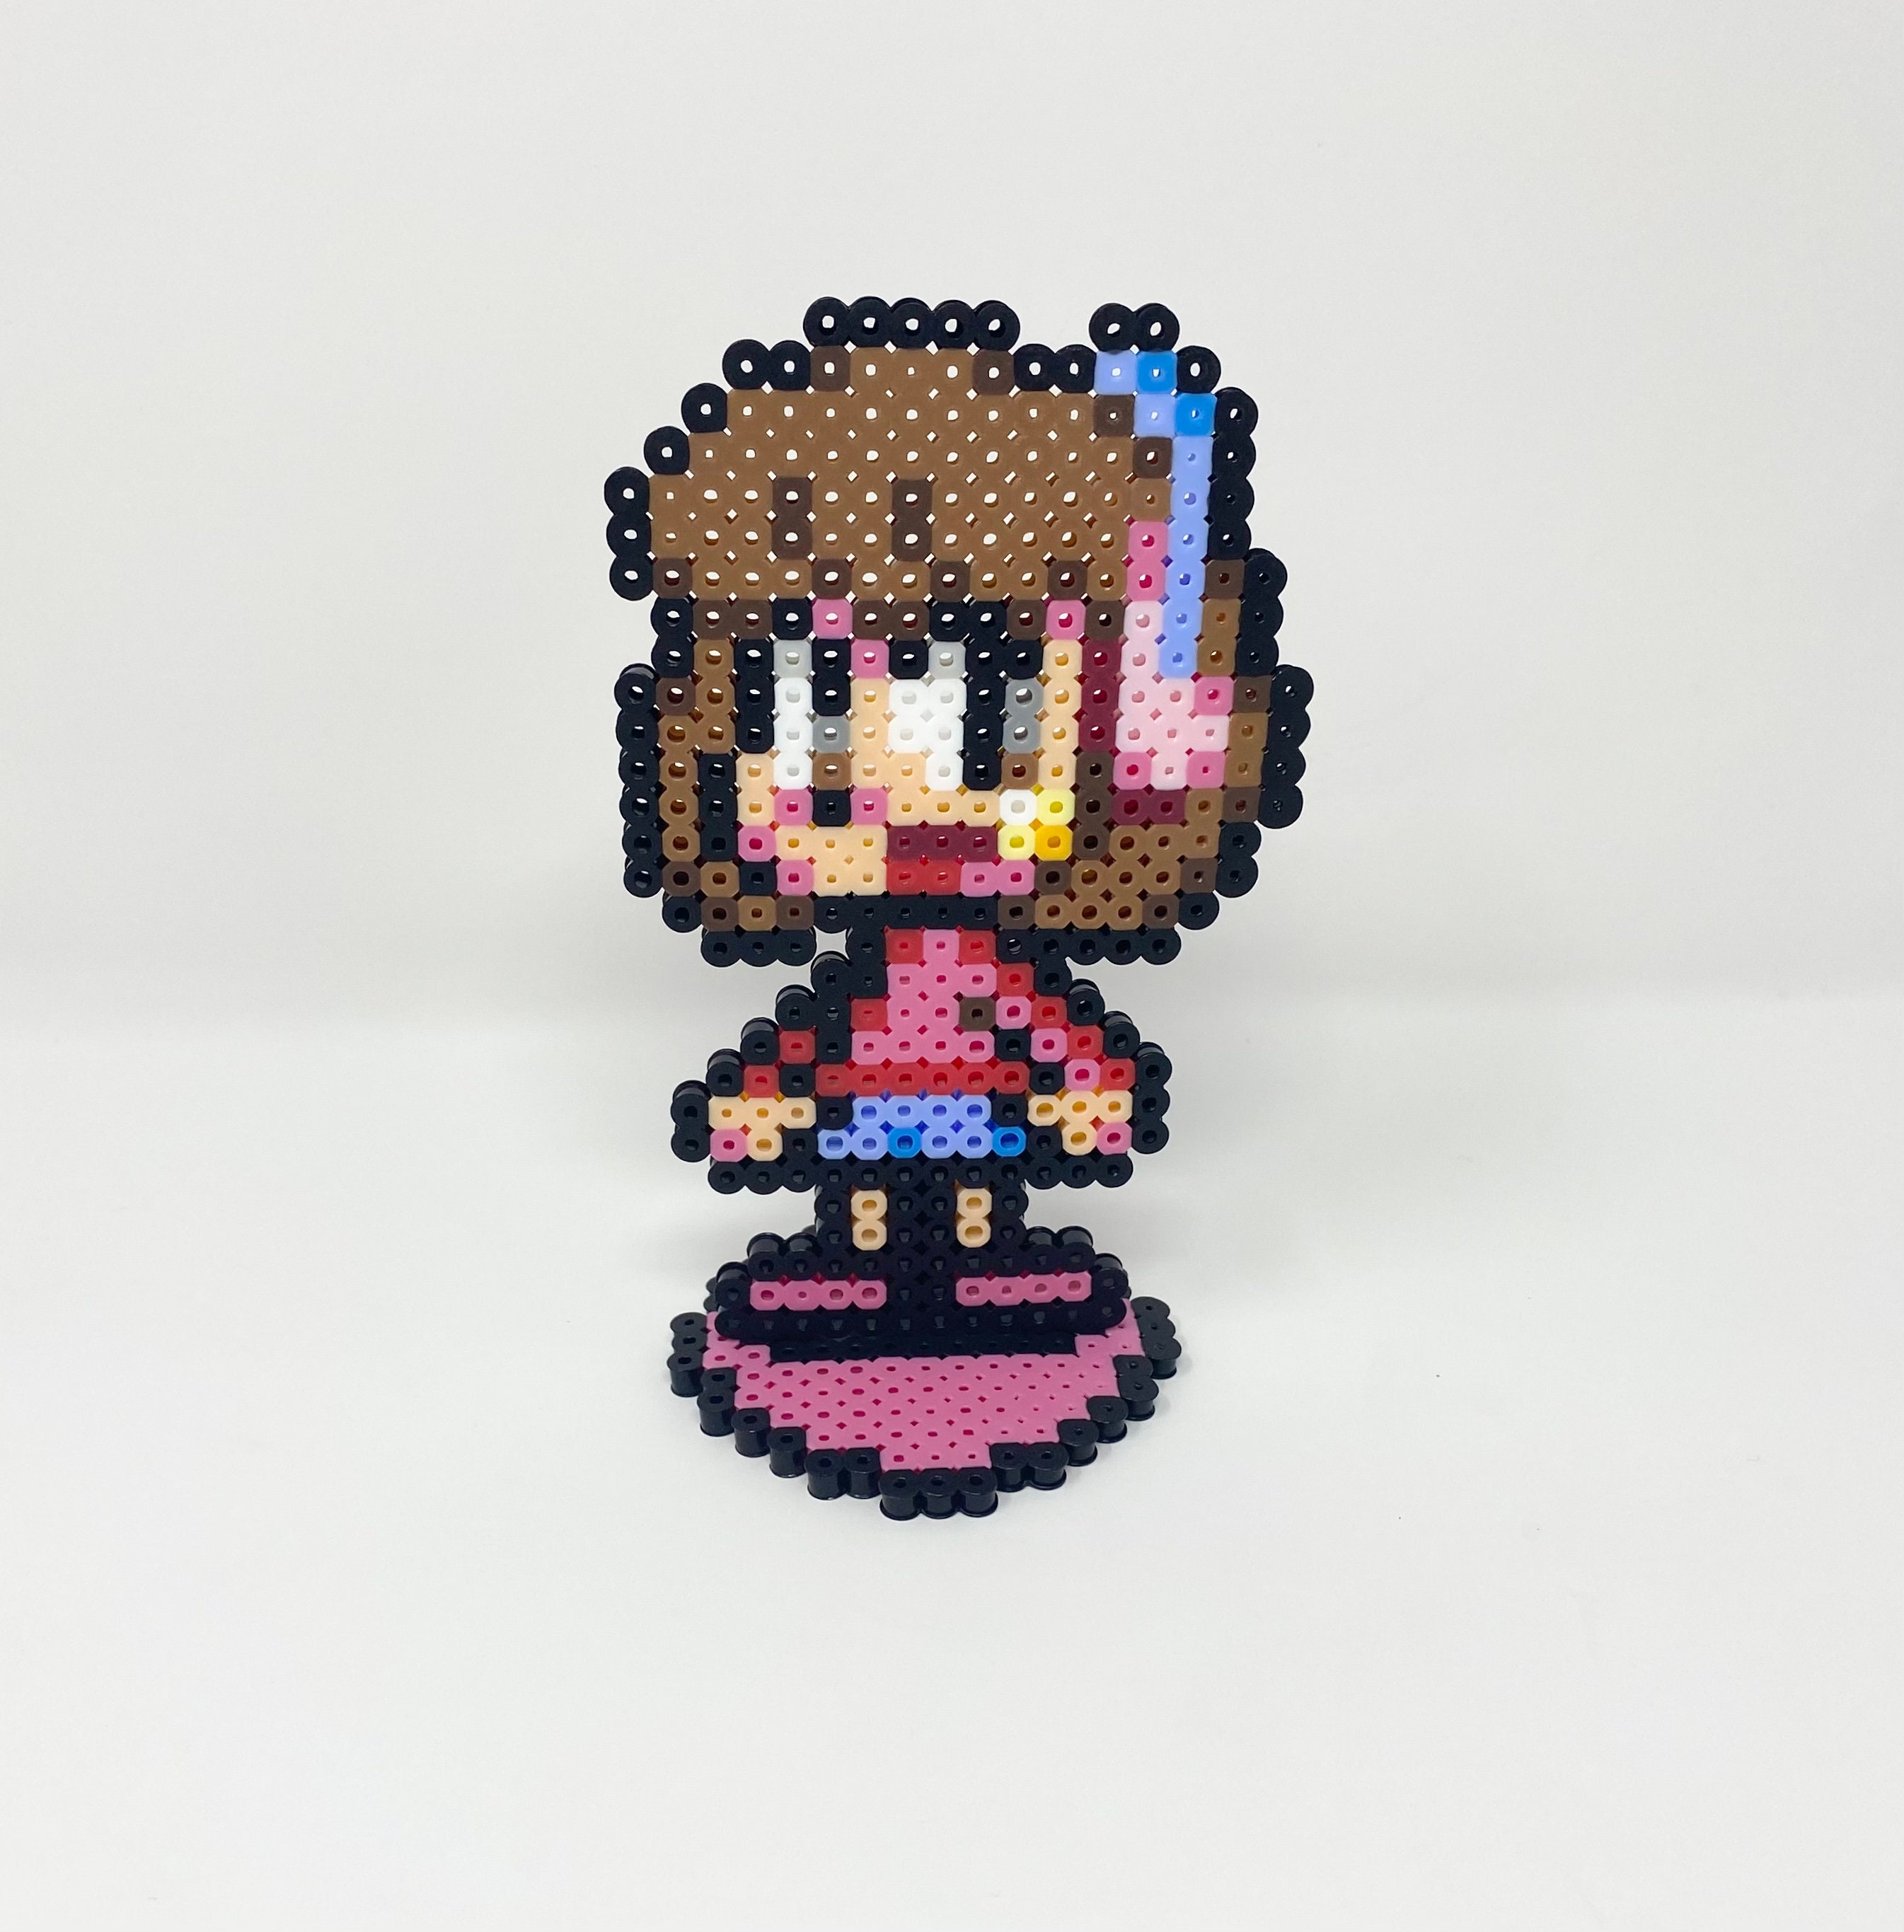 Learn to Use Perler Beads and Become a Pixel Art Pro